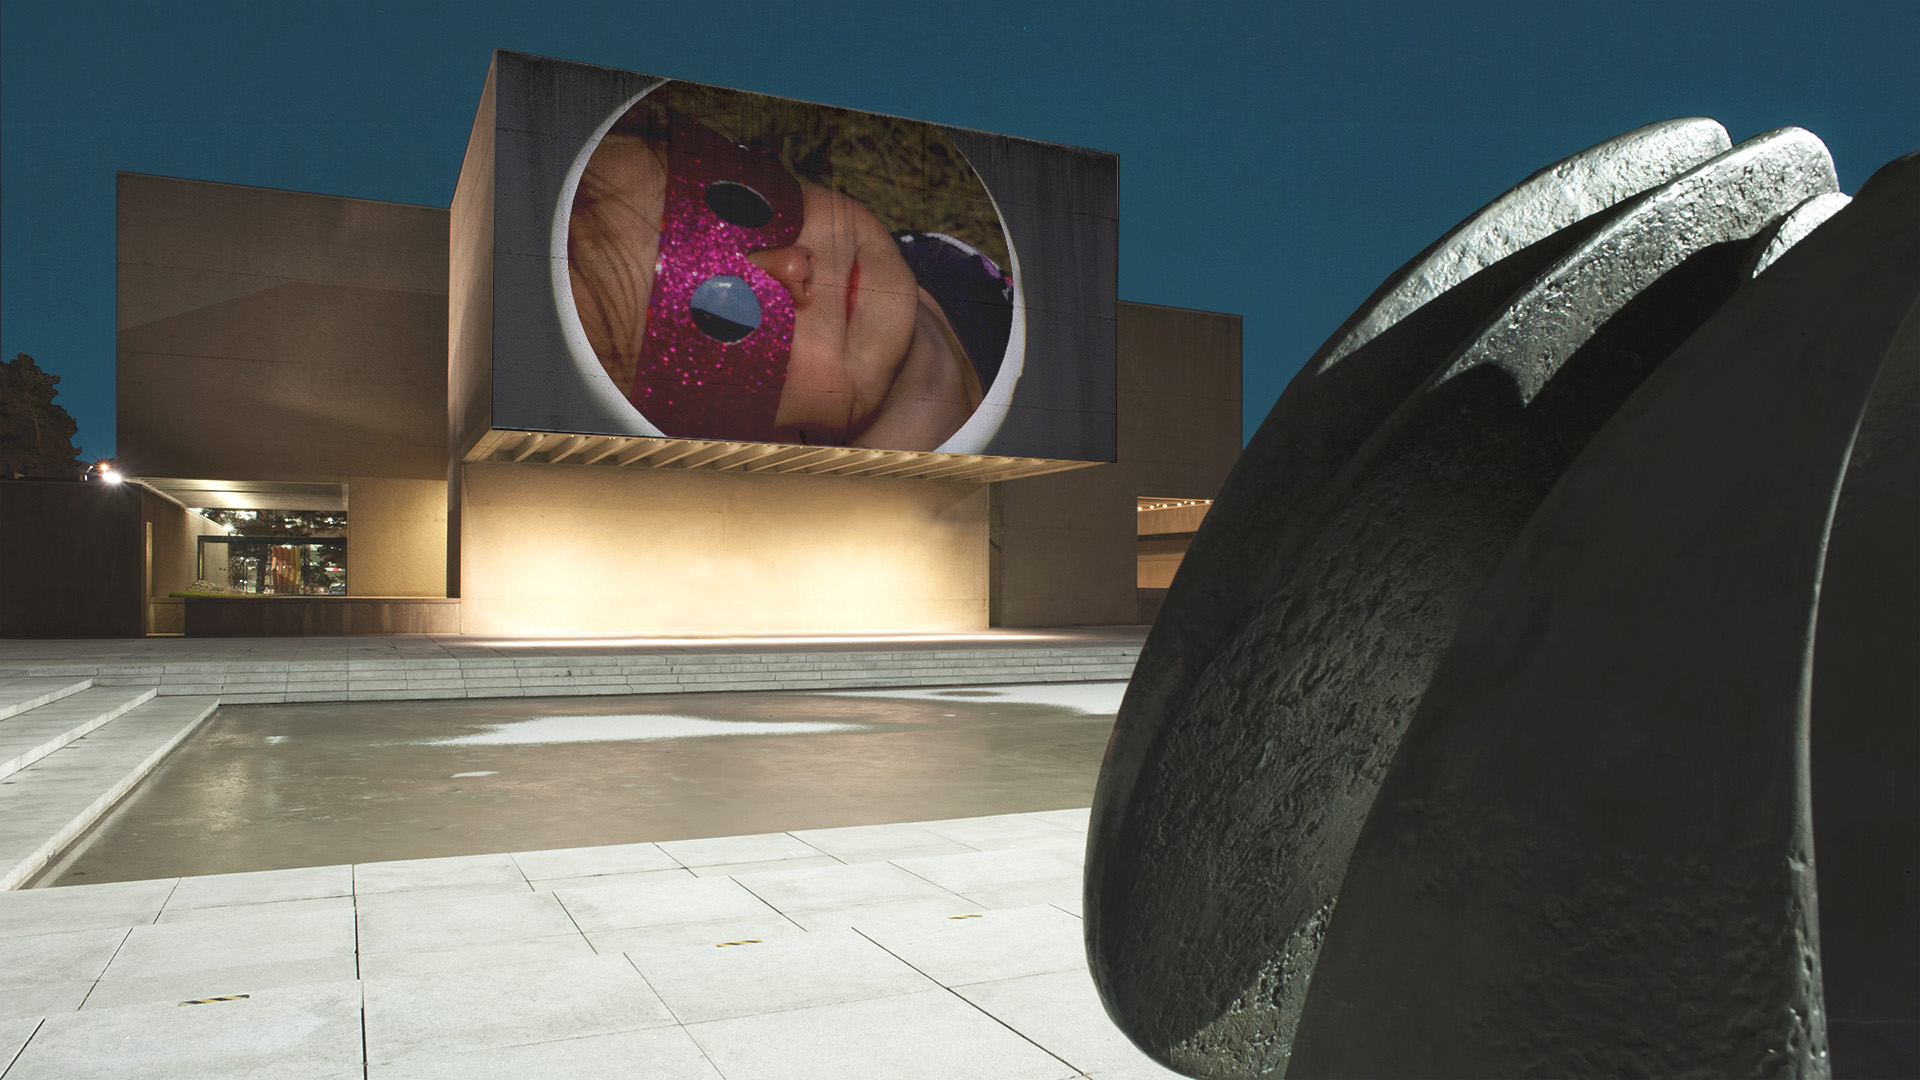 A scene from "Tropistic Creatures," as projected outdoors at the Everson Museum of Art.